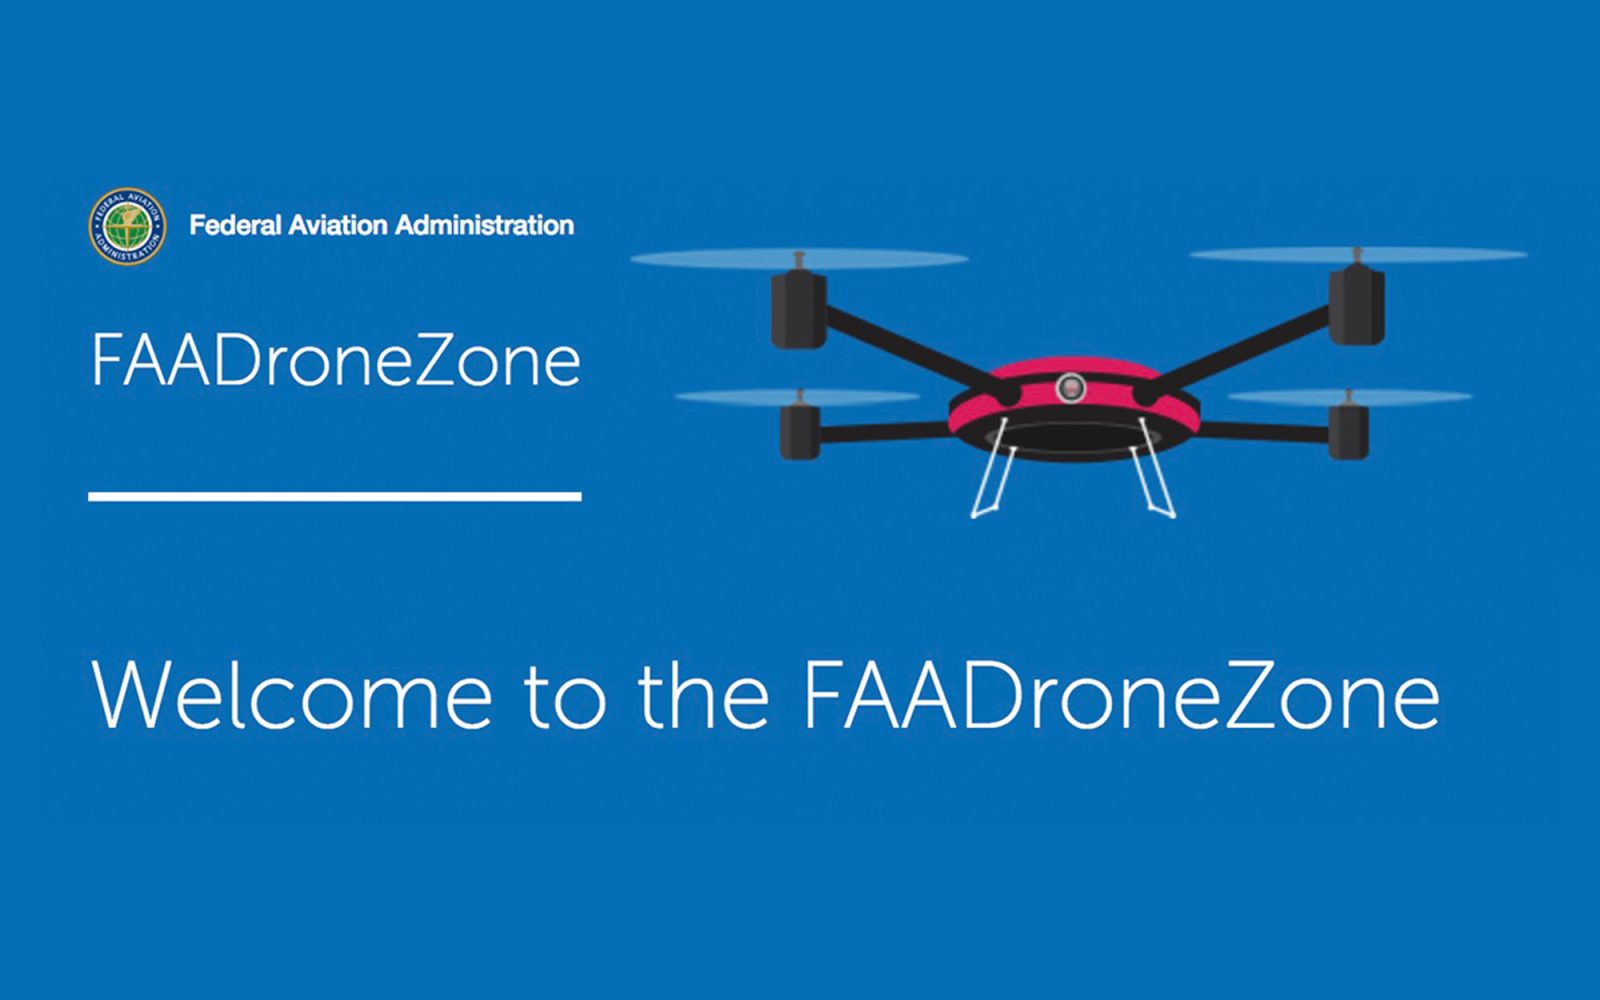 Need to register your drone? Watch out for scams. Use FAA's Drone Zone instead.